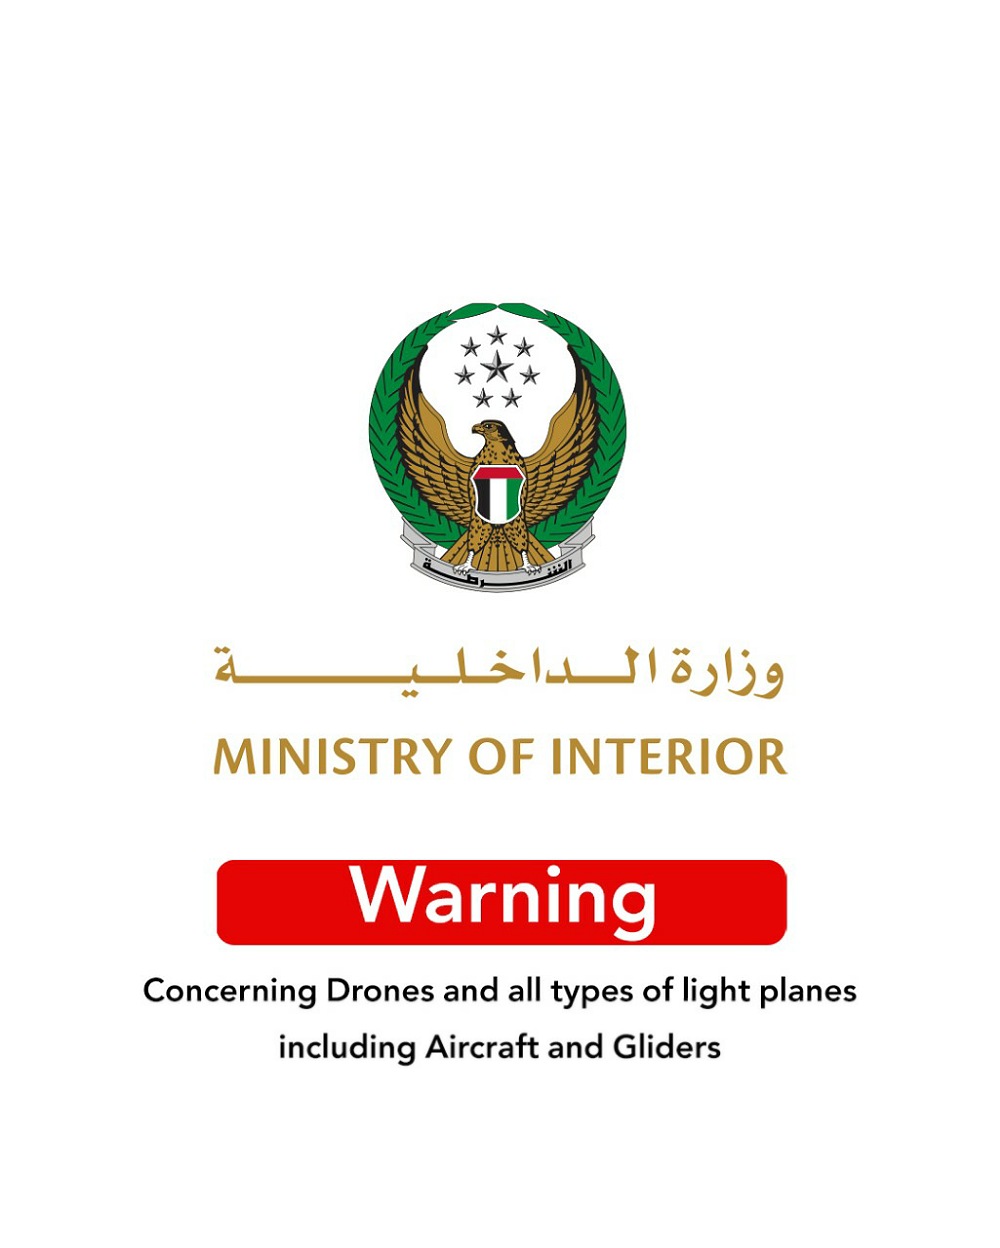 MOI stops drone flying operations for owners, practitioners and enthusiasts